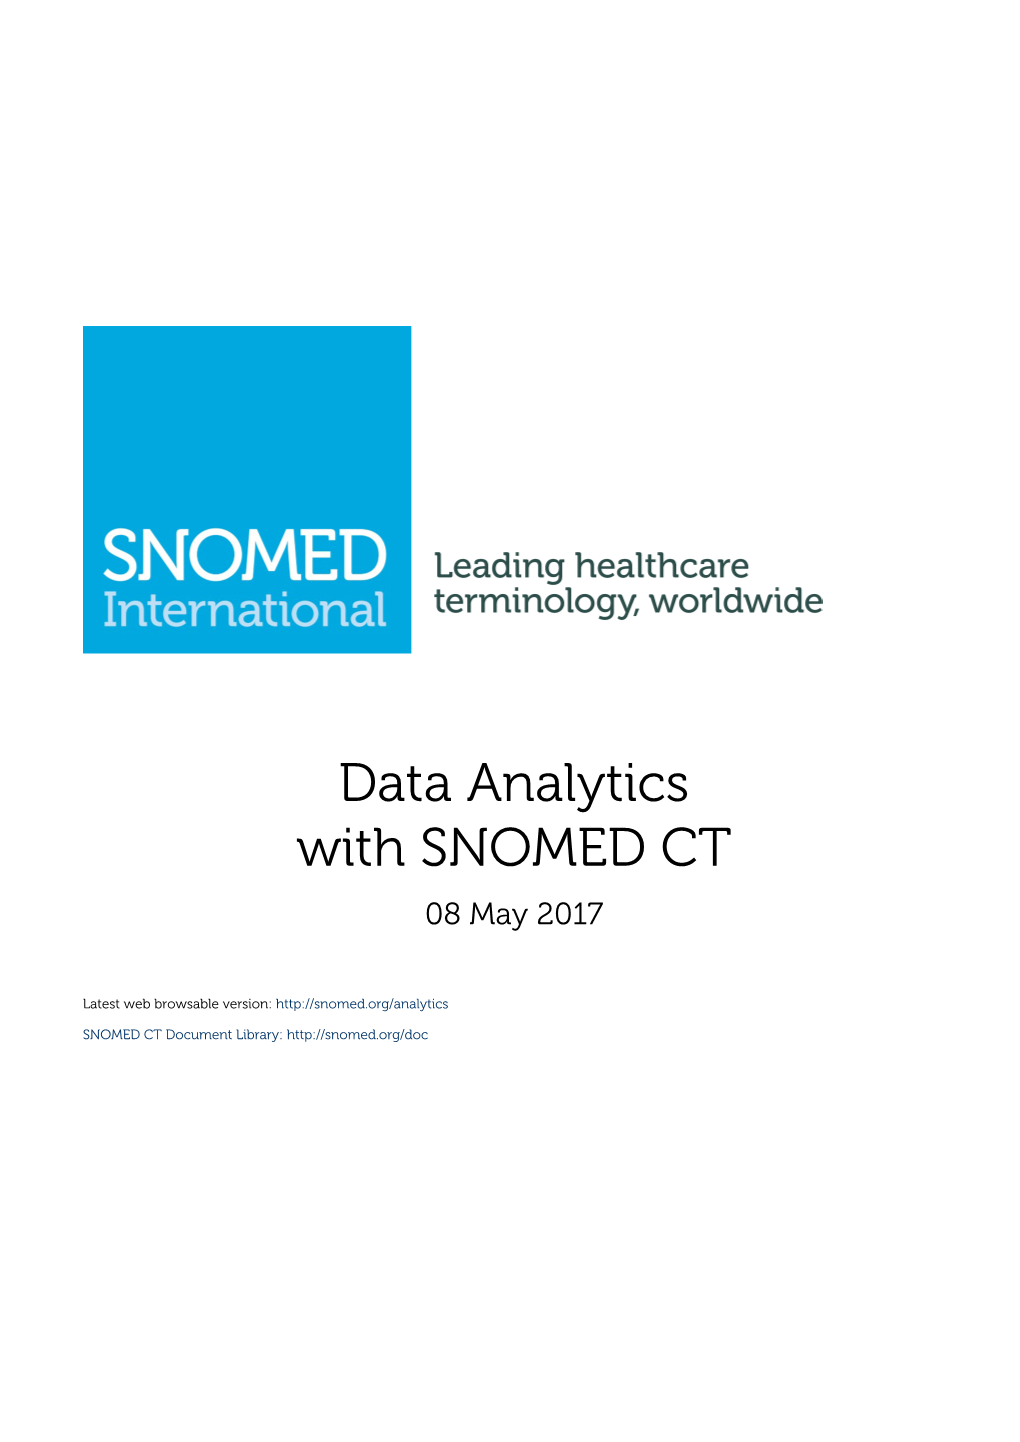 Data Analytics with SNOMED CT 08 May 2017